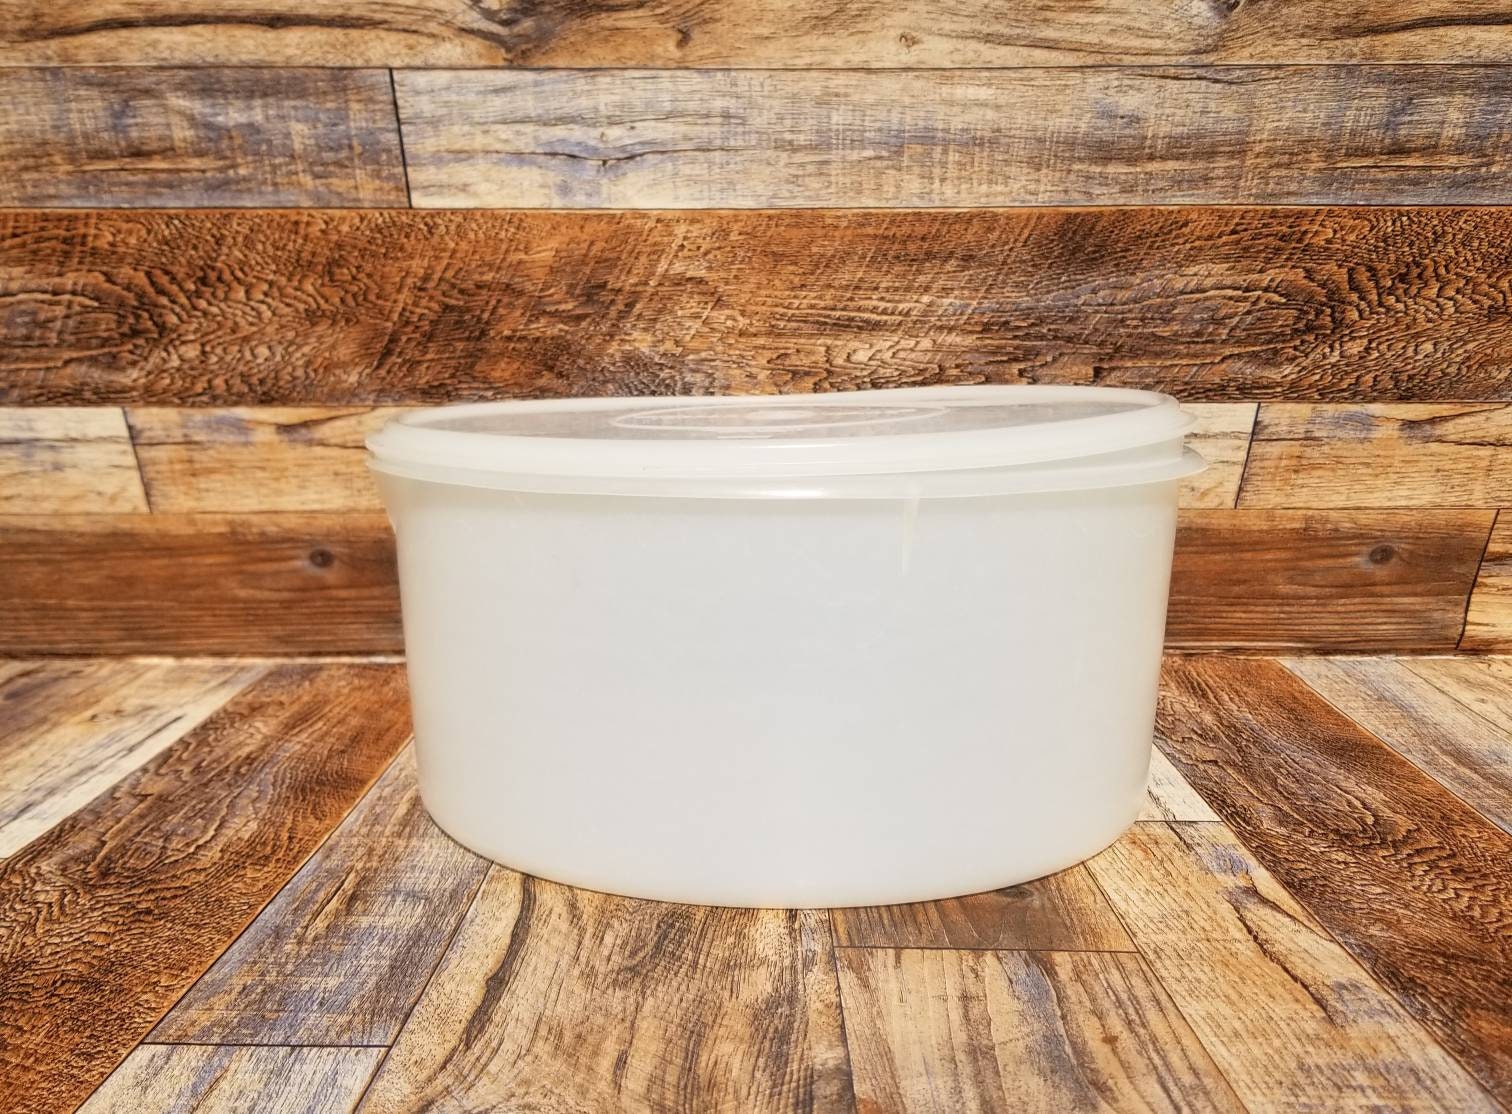 Vintage Tupperware Large Round Container & Lid. White. Cake Taker